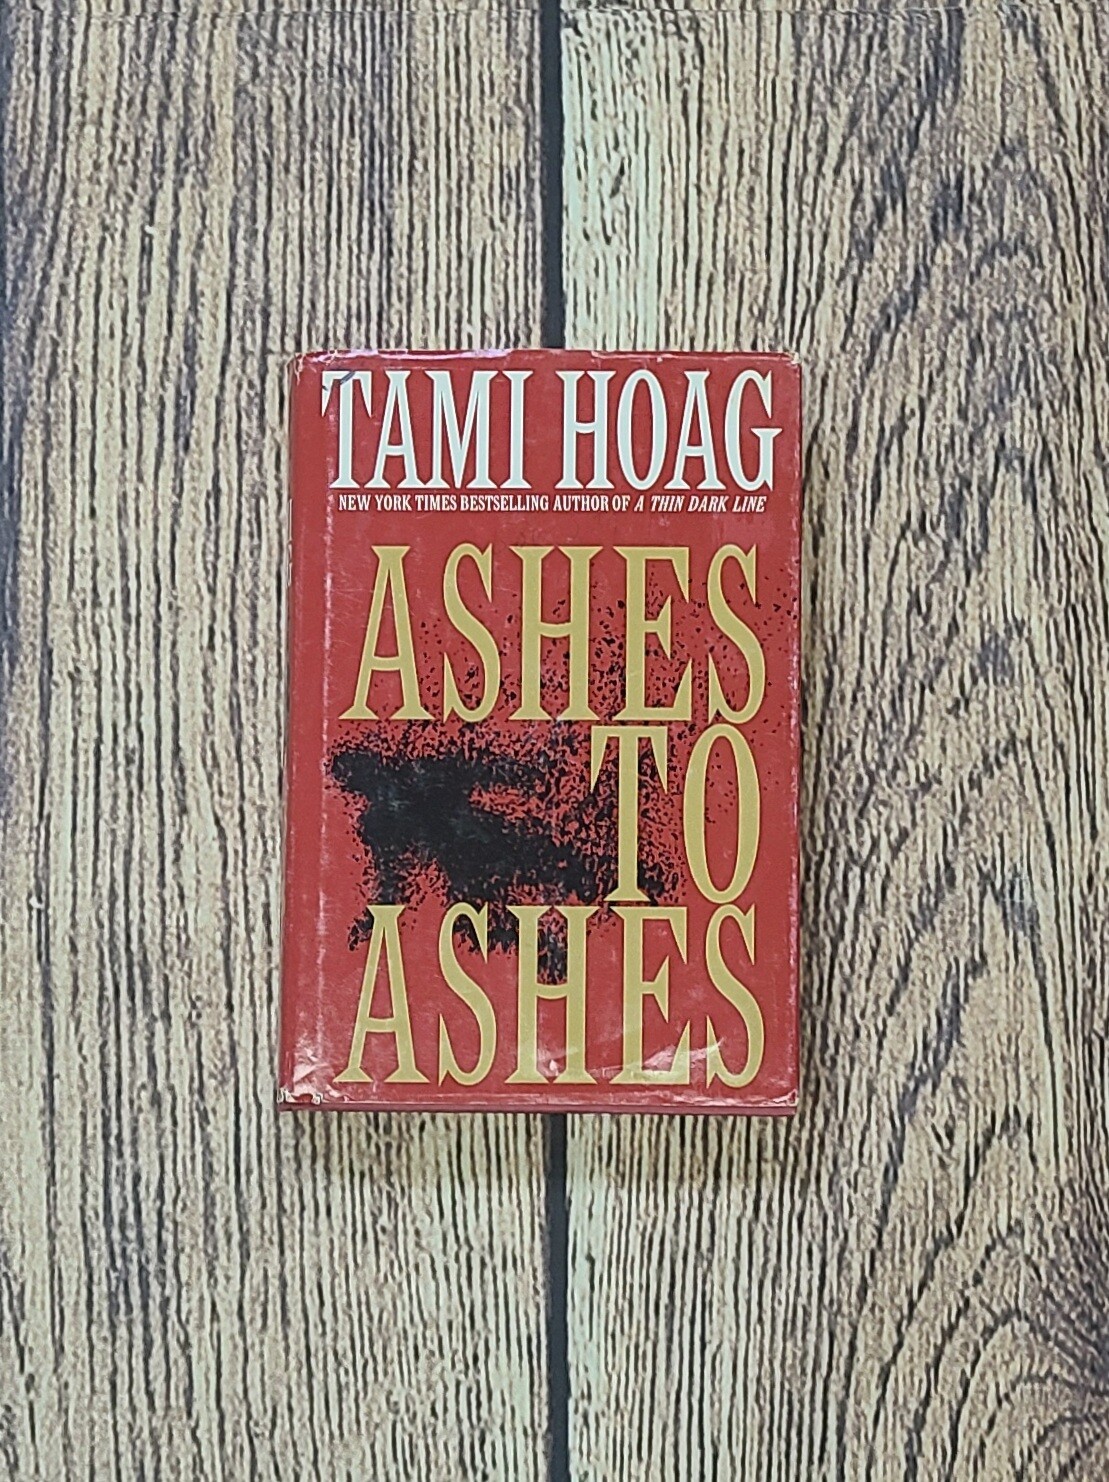 Ashes to Ashes by Tami Hoag - Hardback